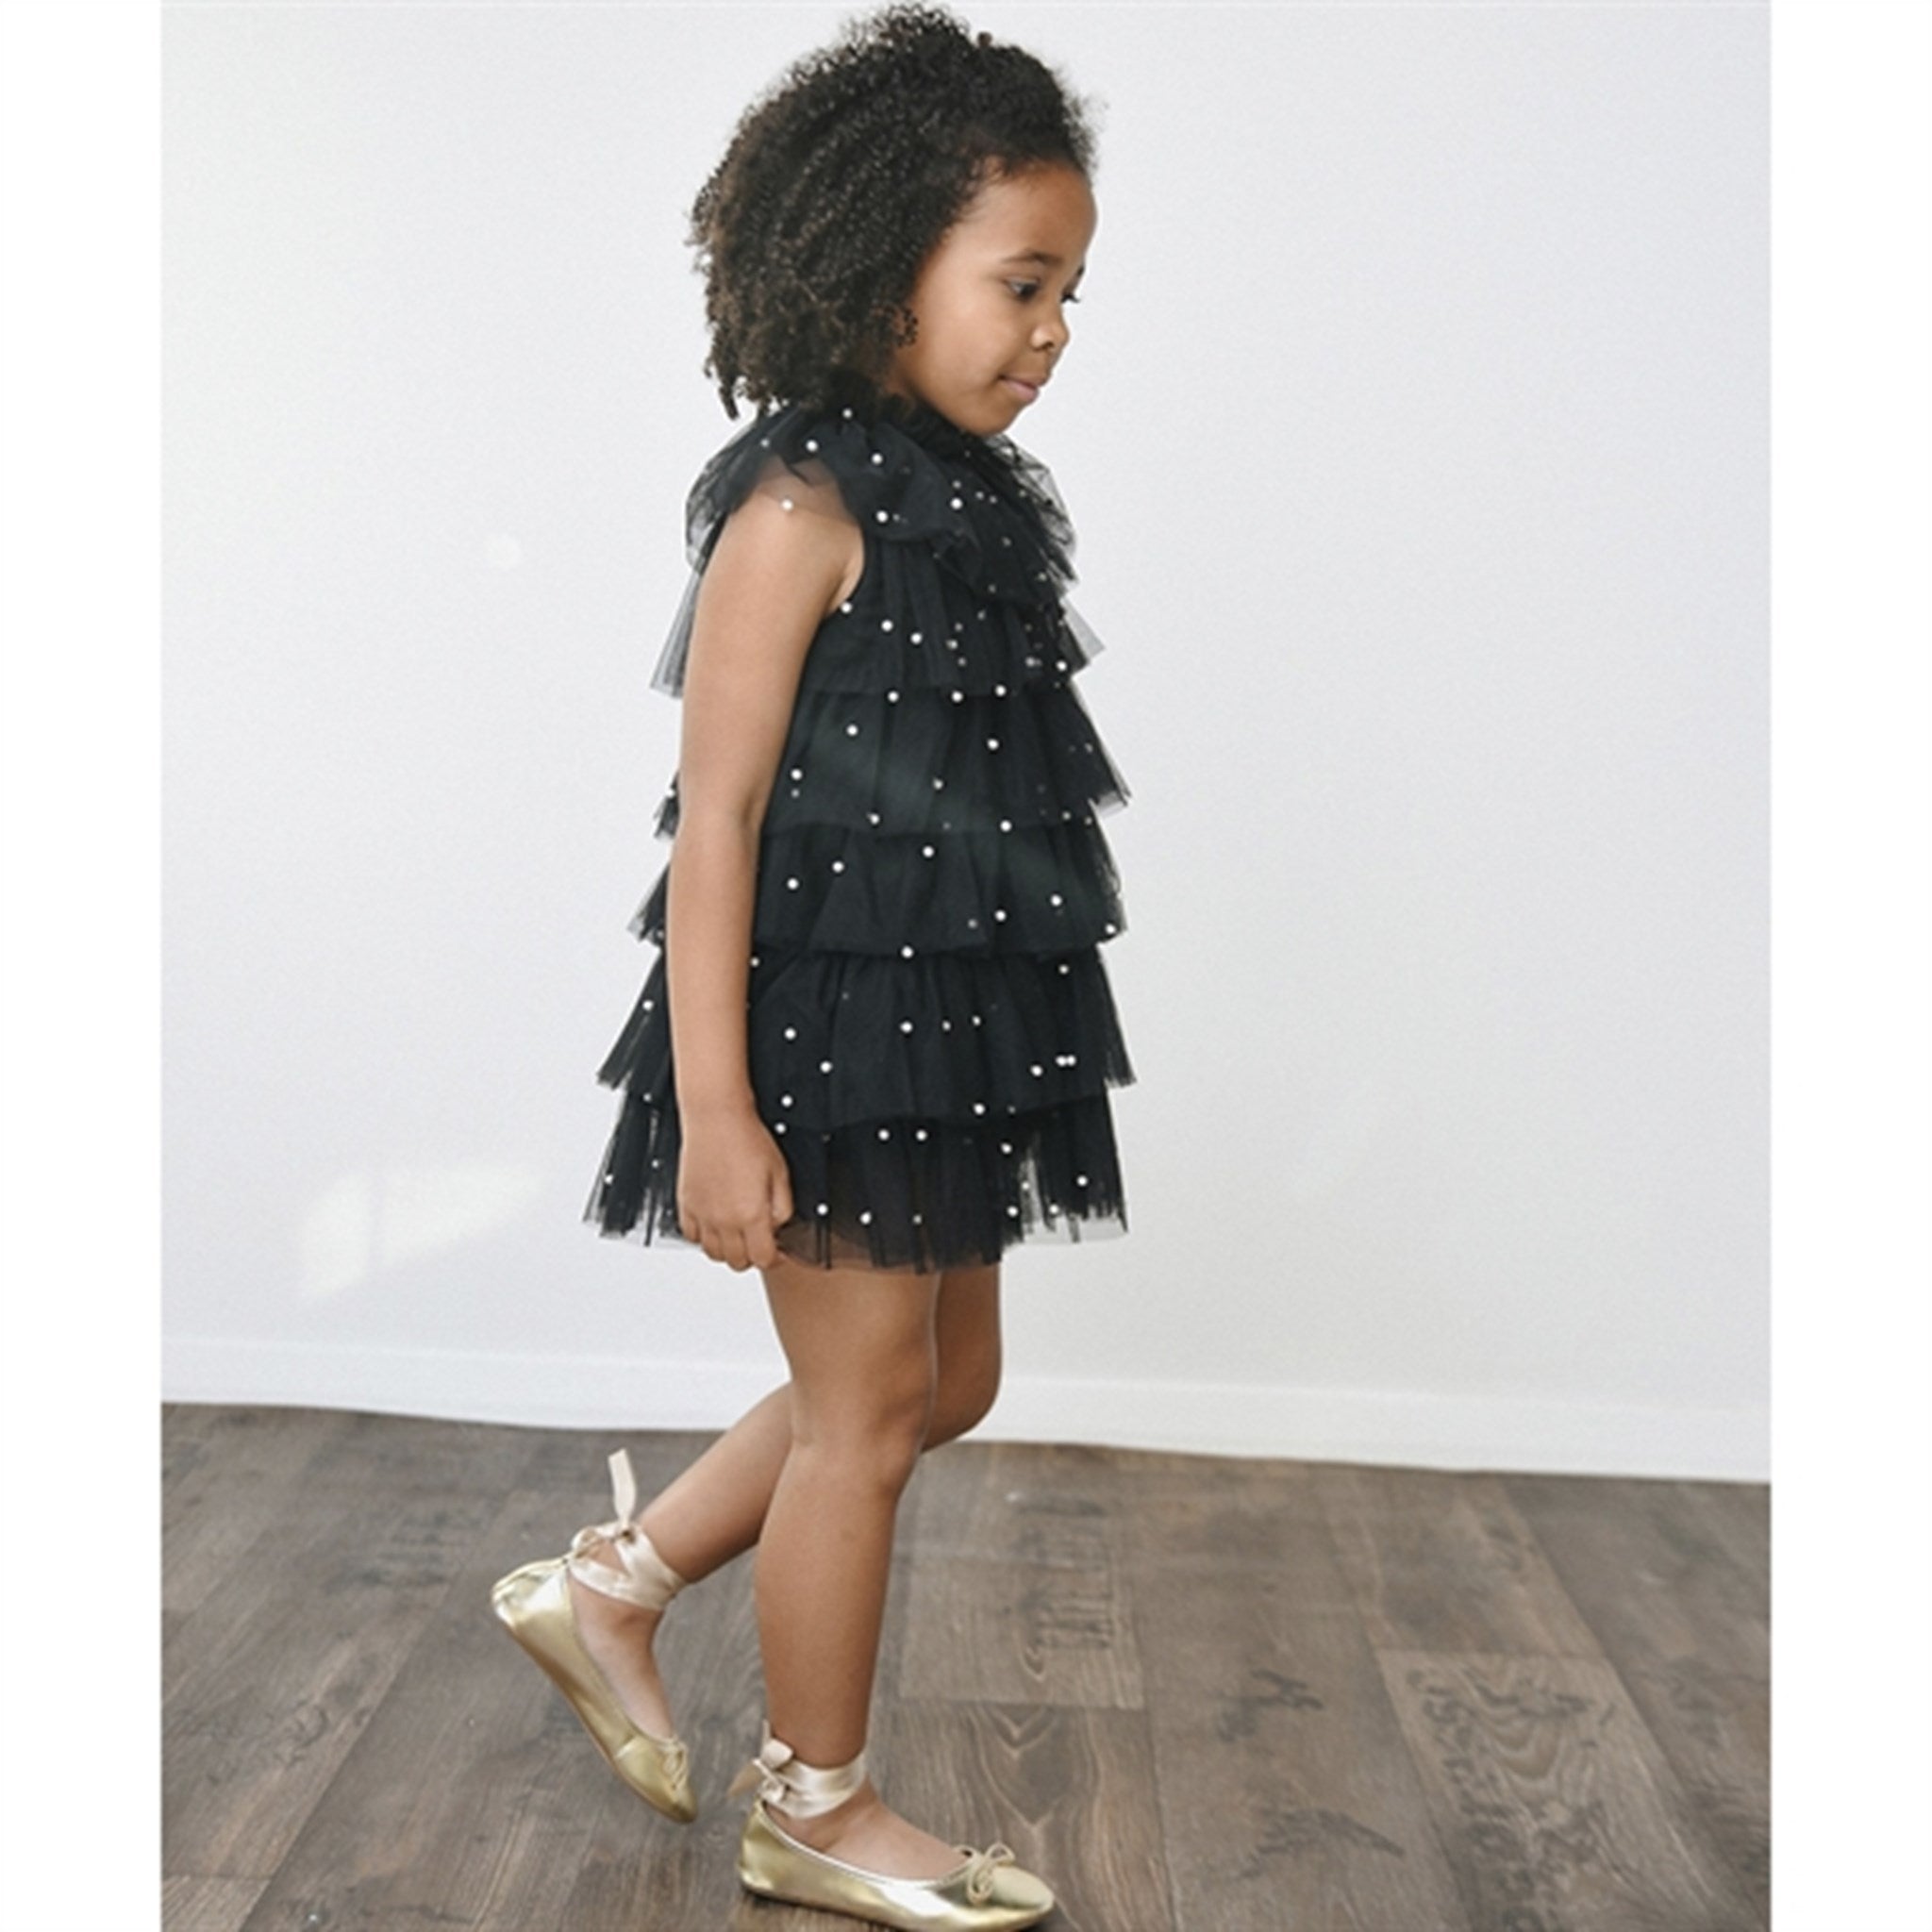 Dolly by Le Petit Tom Pearl Tutully Tiered Tulle Tuttu Kjole Black 5